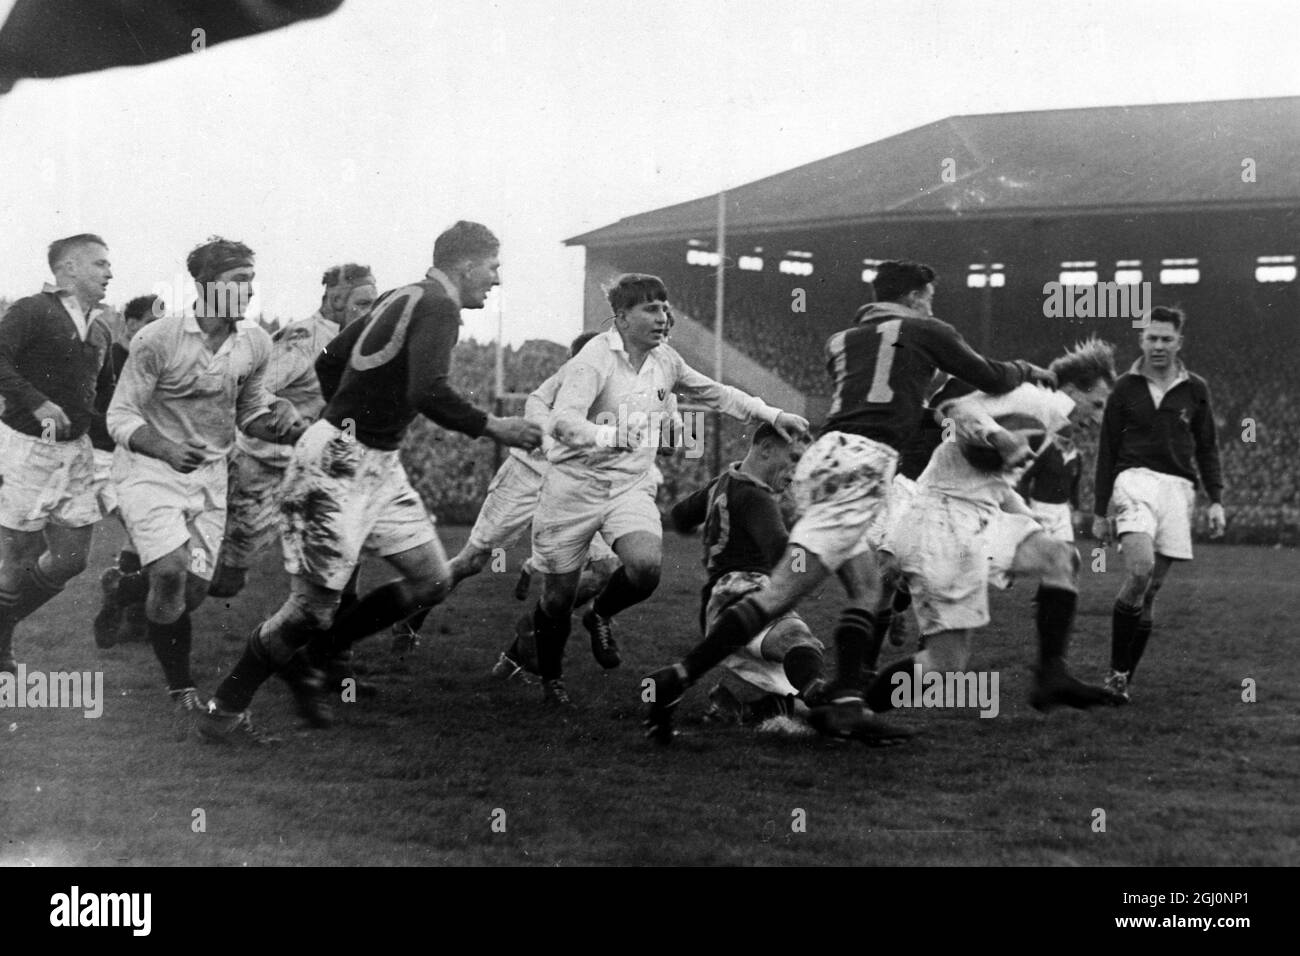 Murrayfield , Scotland : R C Taylor (Kelvinside) , of Scotland , tries a break through and is tackled by South Africa's J D Brewis , followed up by Scotland's J A R MacPhail (Edinburgh) , during the Rugby International , when South Africa beat Scotland 44 - 0 ; the biggest victory ever achieved by a touring side in Britain . Murrayfield , Scotland . 28 September 1951 Stock Photo